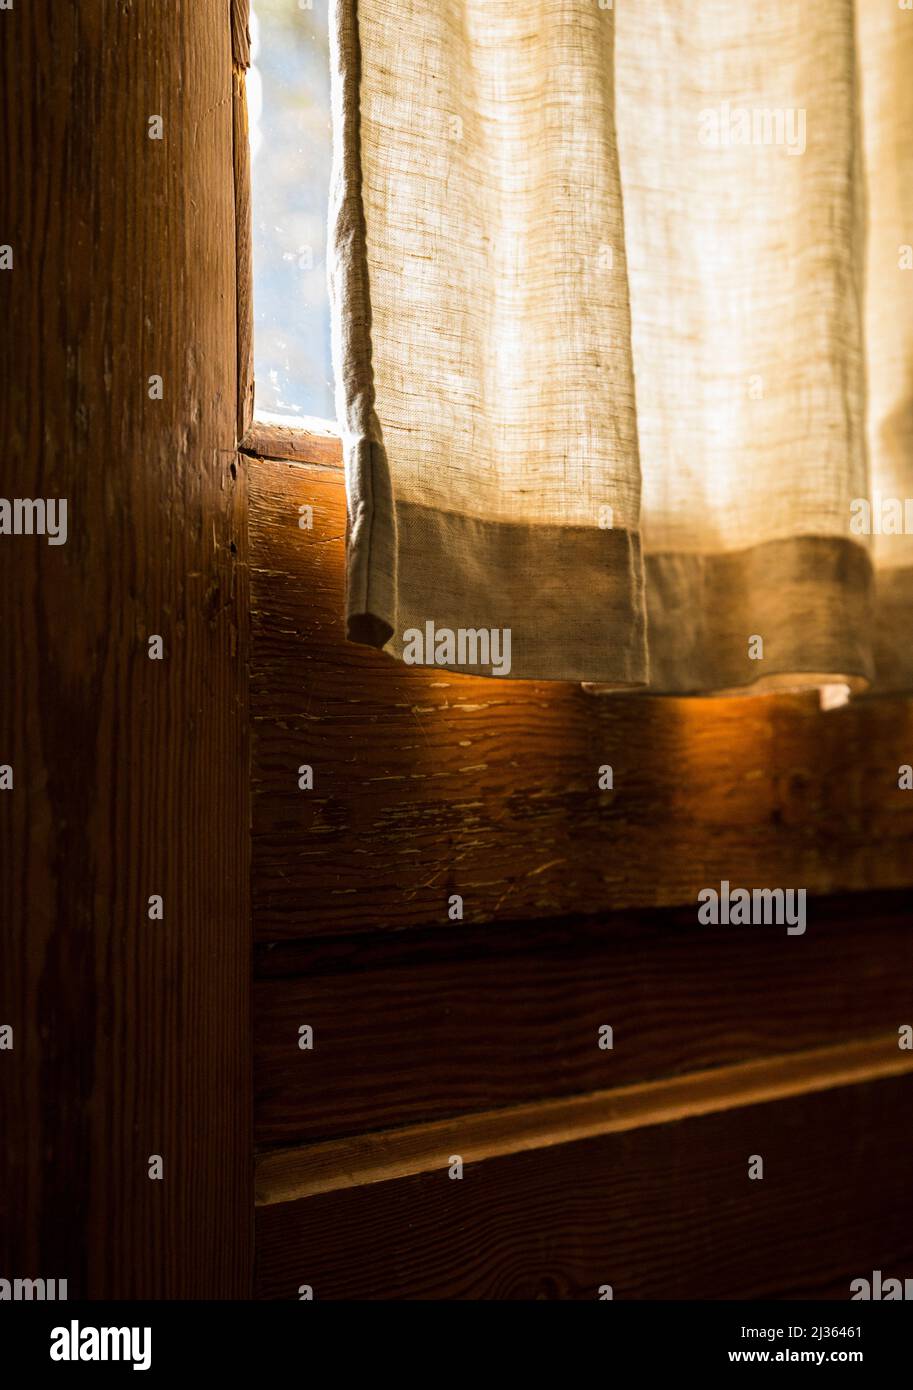 A curtain hanging over a window on a door with sunlight sneaking in between. Stock Photo